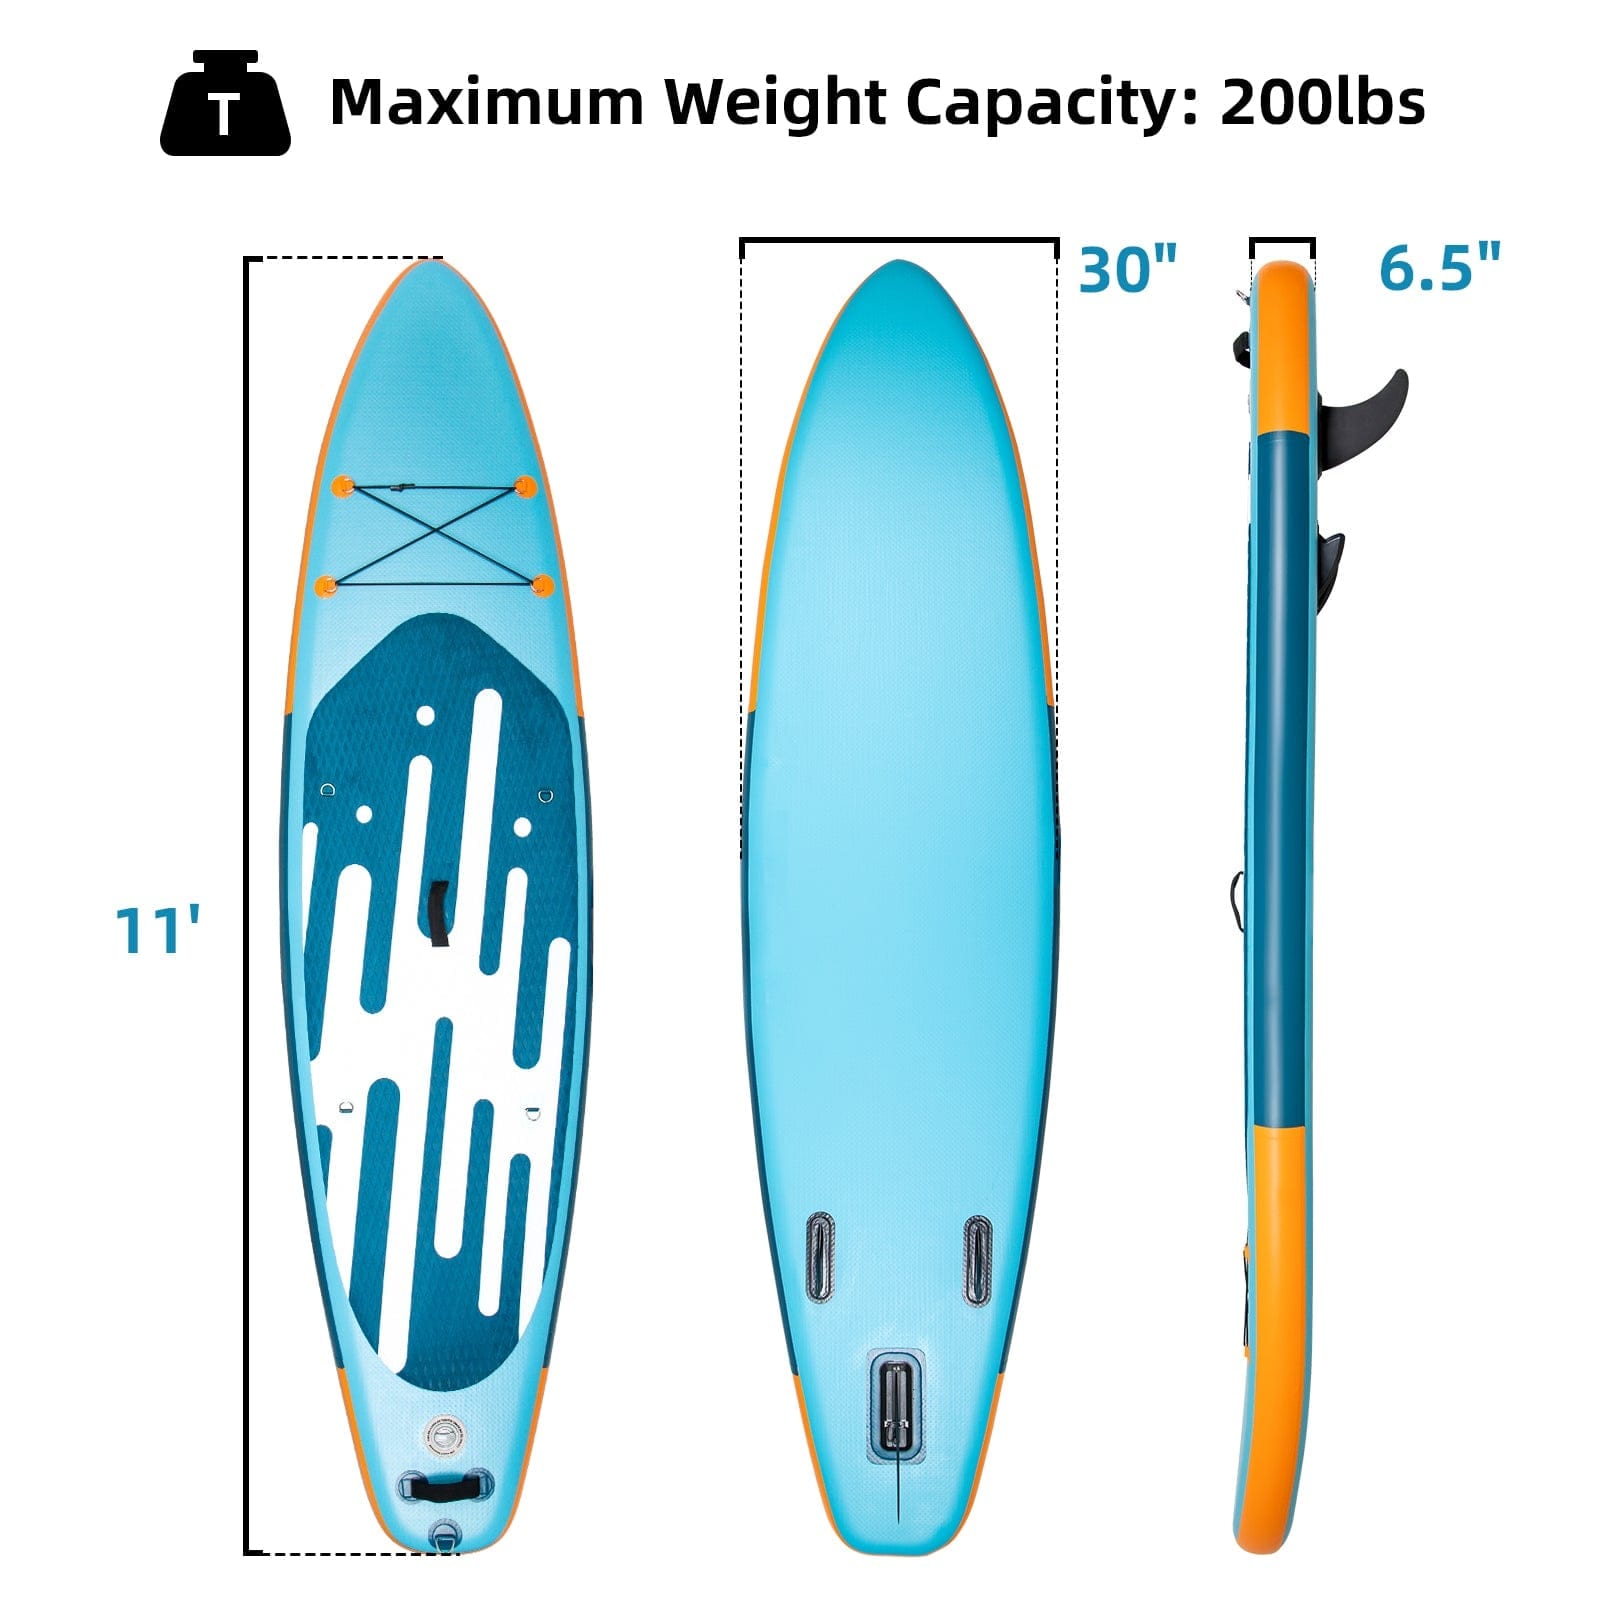 SOLIDEE Stand Up Paddle Board SOLIDEE 11 Ft Inflatable Stand Up Paddle Board with Kayak Seat Backpack,Blue